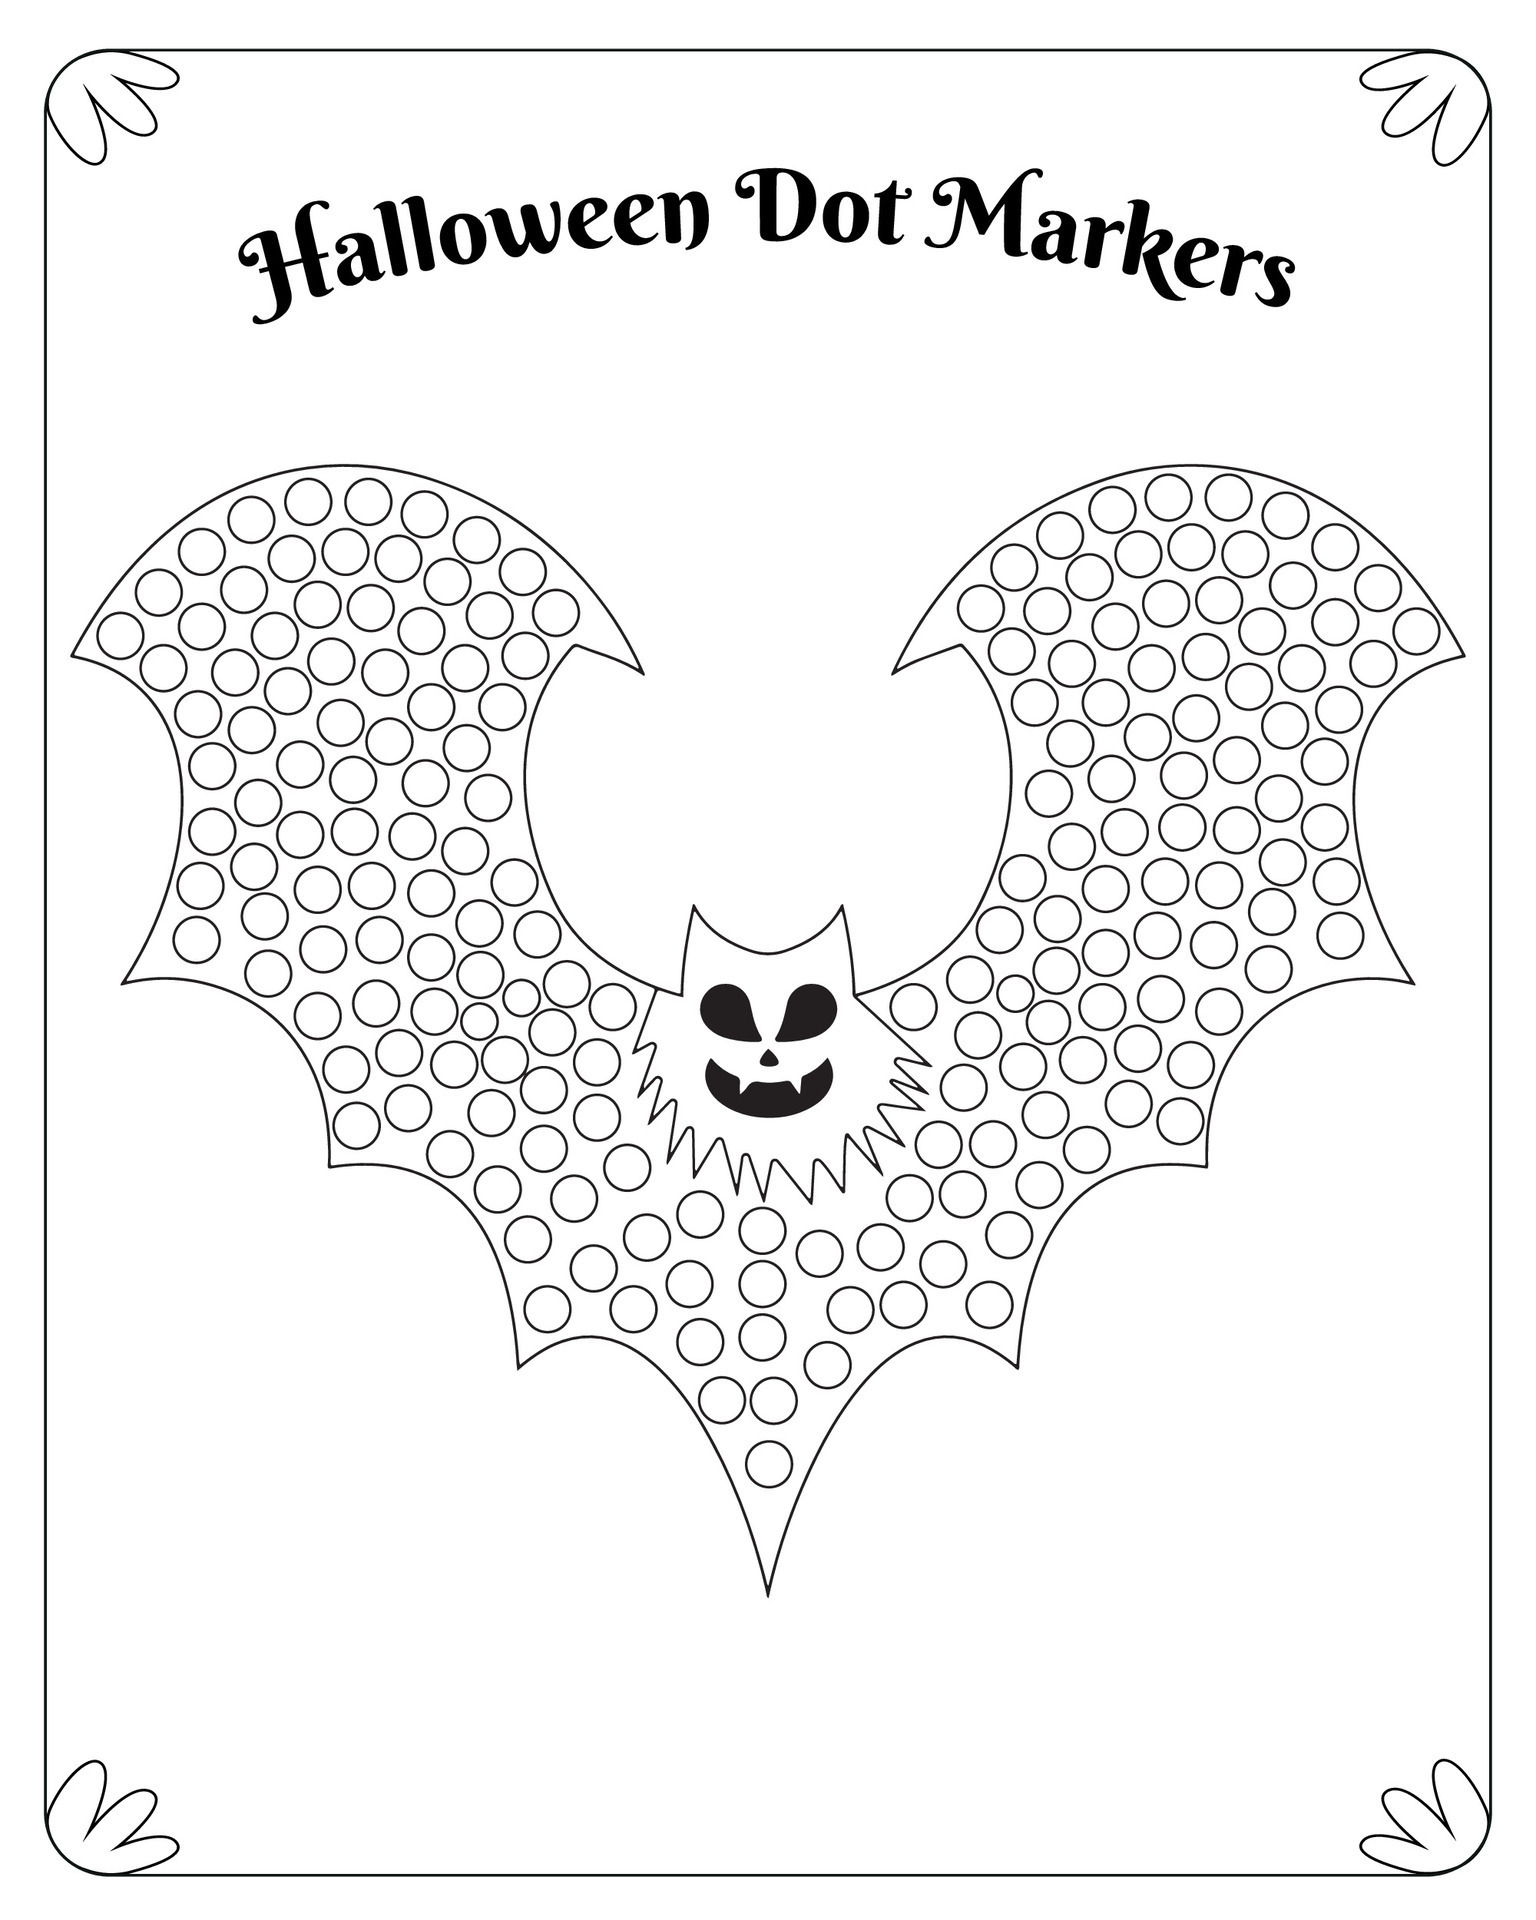 Halloween dot markers coloring page for kids ages 4-8: Halloween Gifts For  Kids Do a Dot Coloring Book For Kids, Boys, Girls Ages 2- 4 and 4-8 Years o  - Magers & Quinn Booksellers